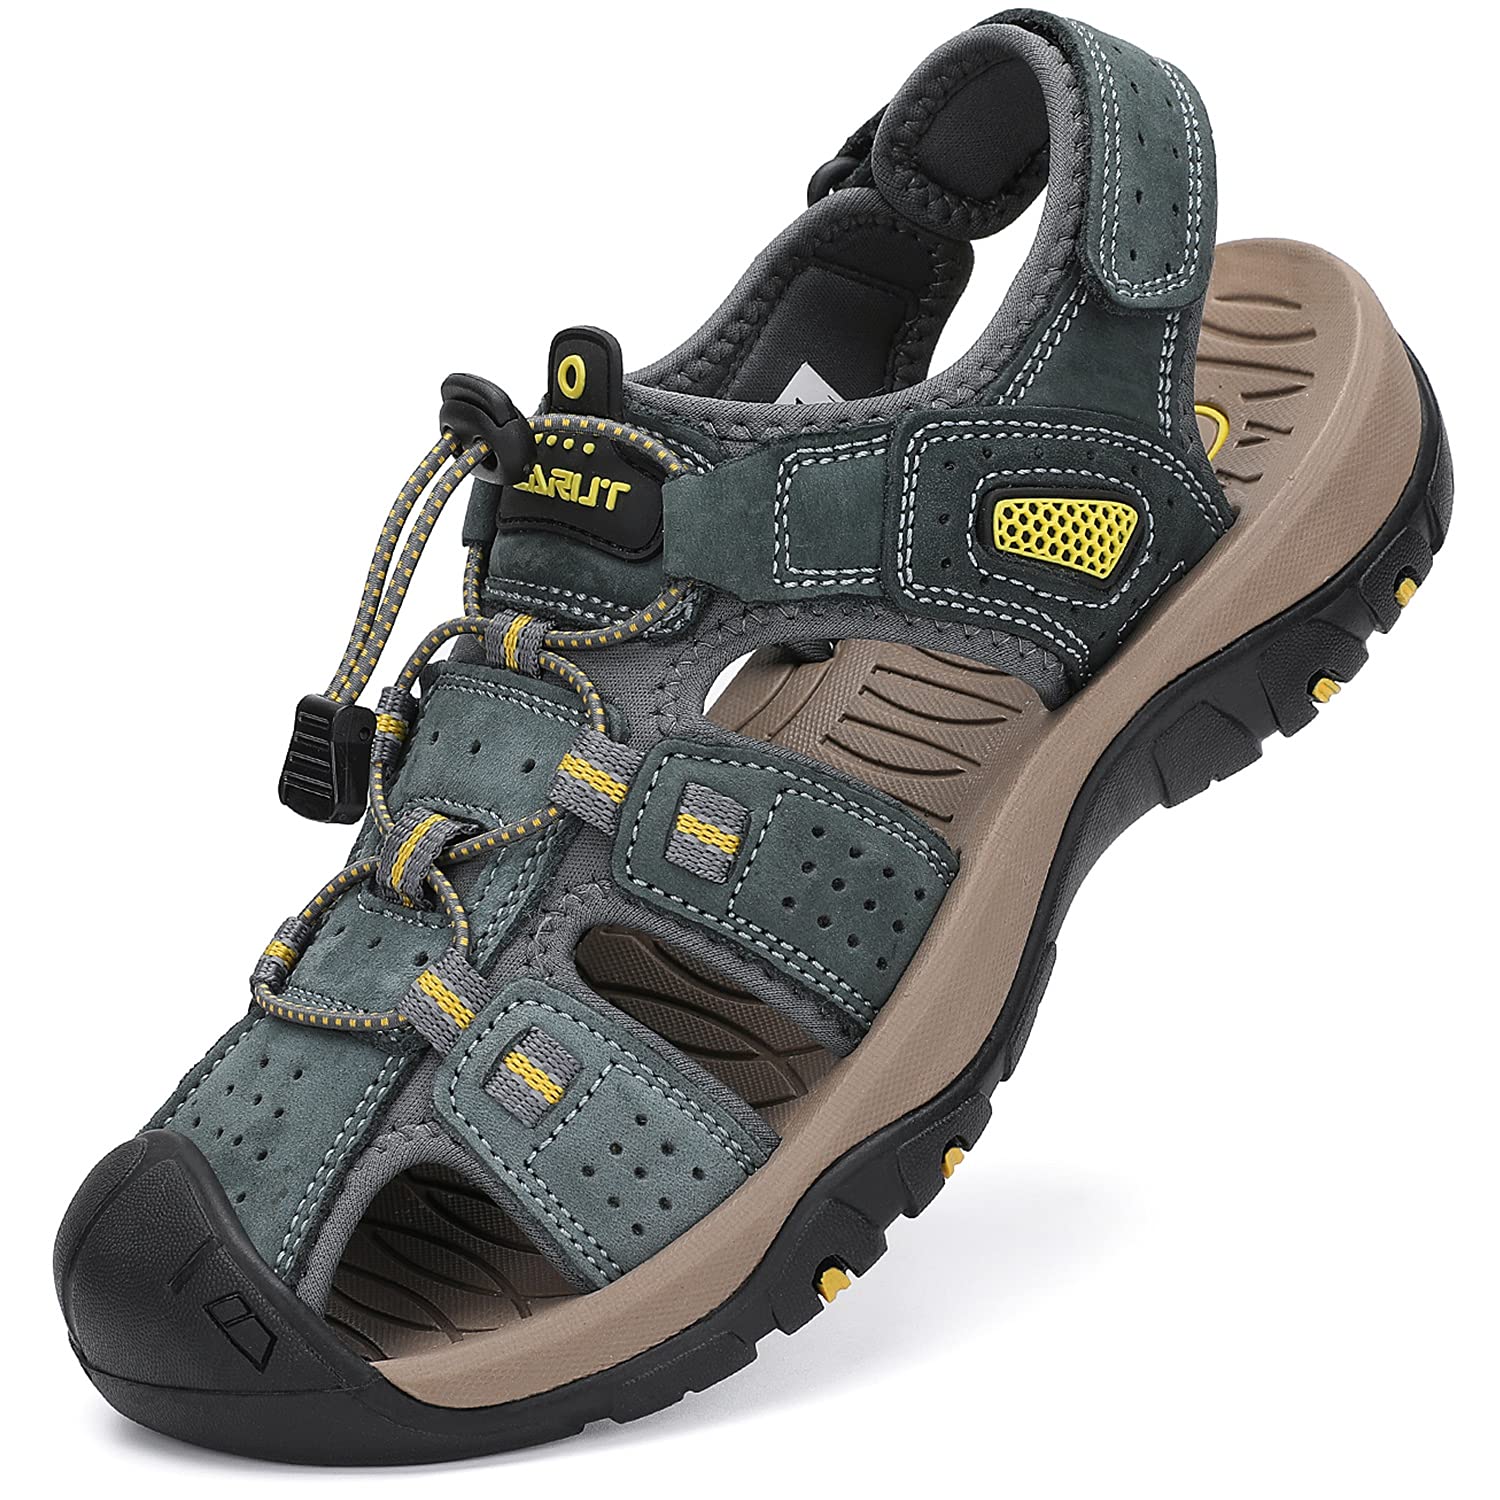 Quechua By Decathlon Unisex Brown Leather Sports Sandal Price in India,  Full Specifications & Offers | DTashion.com